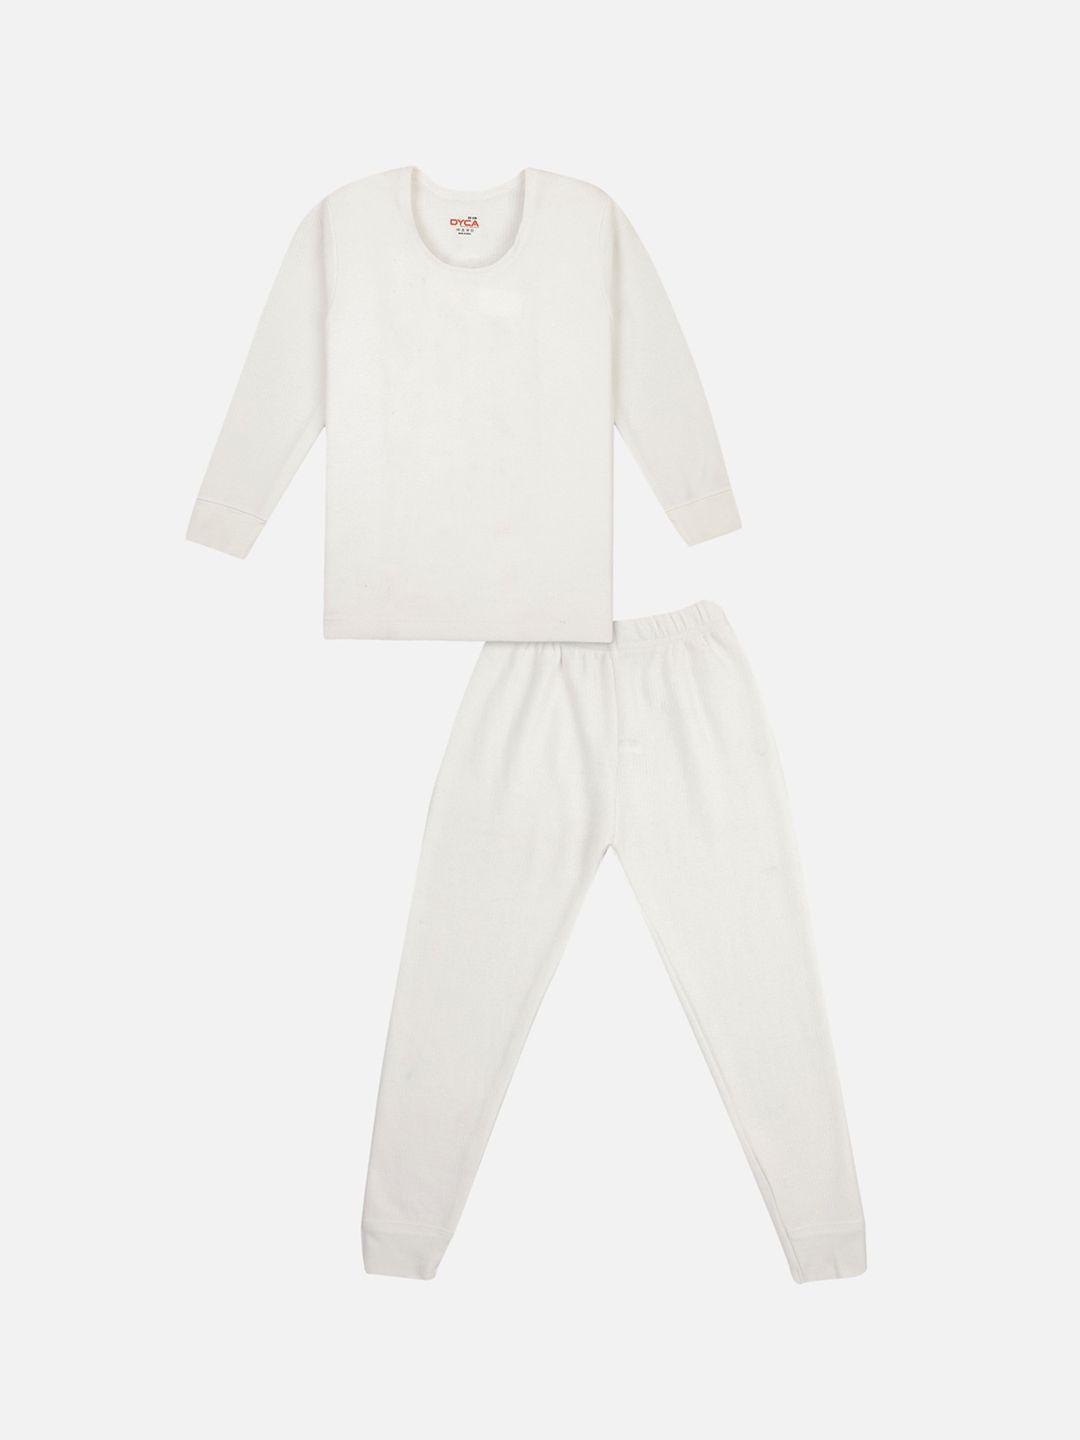 dyca kids off-white solid thermal set